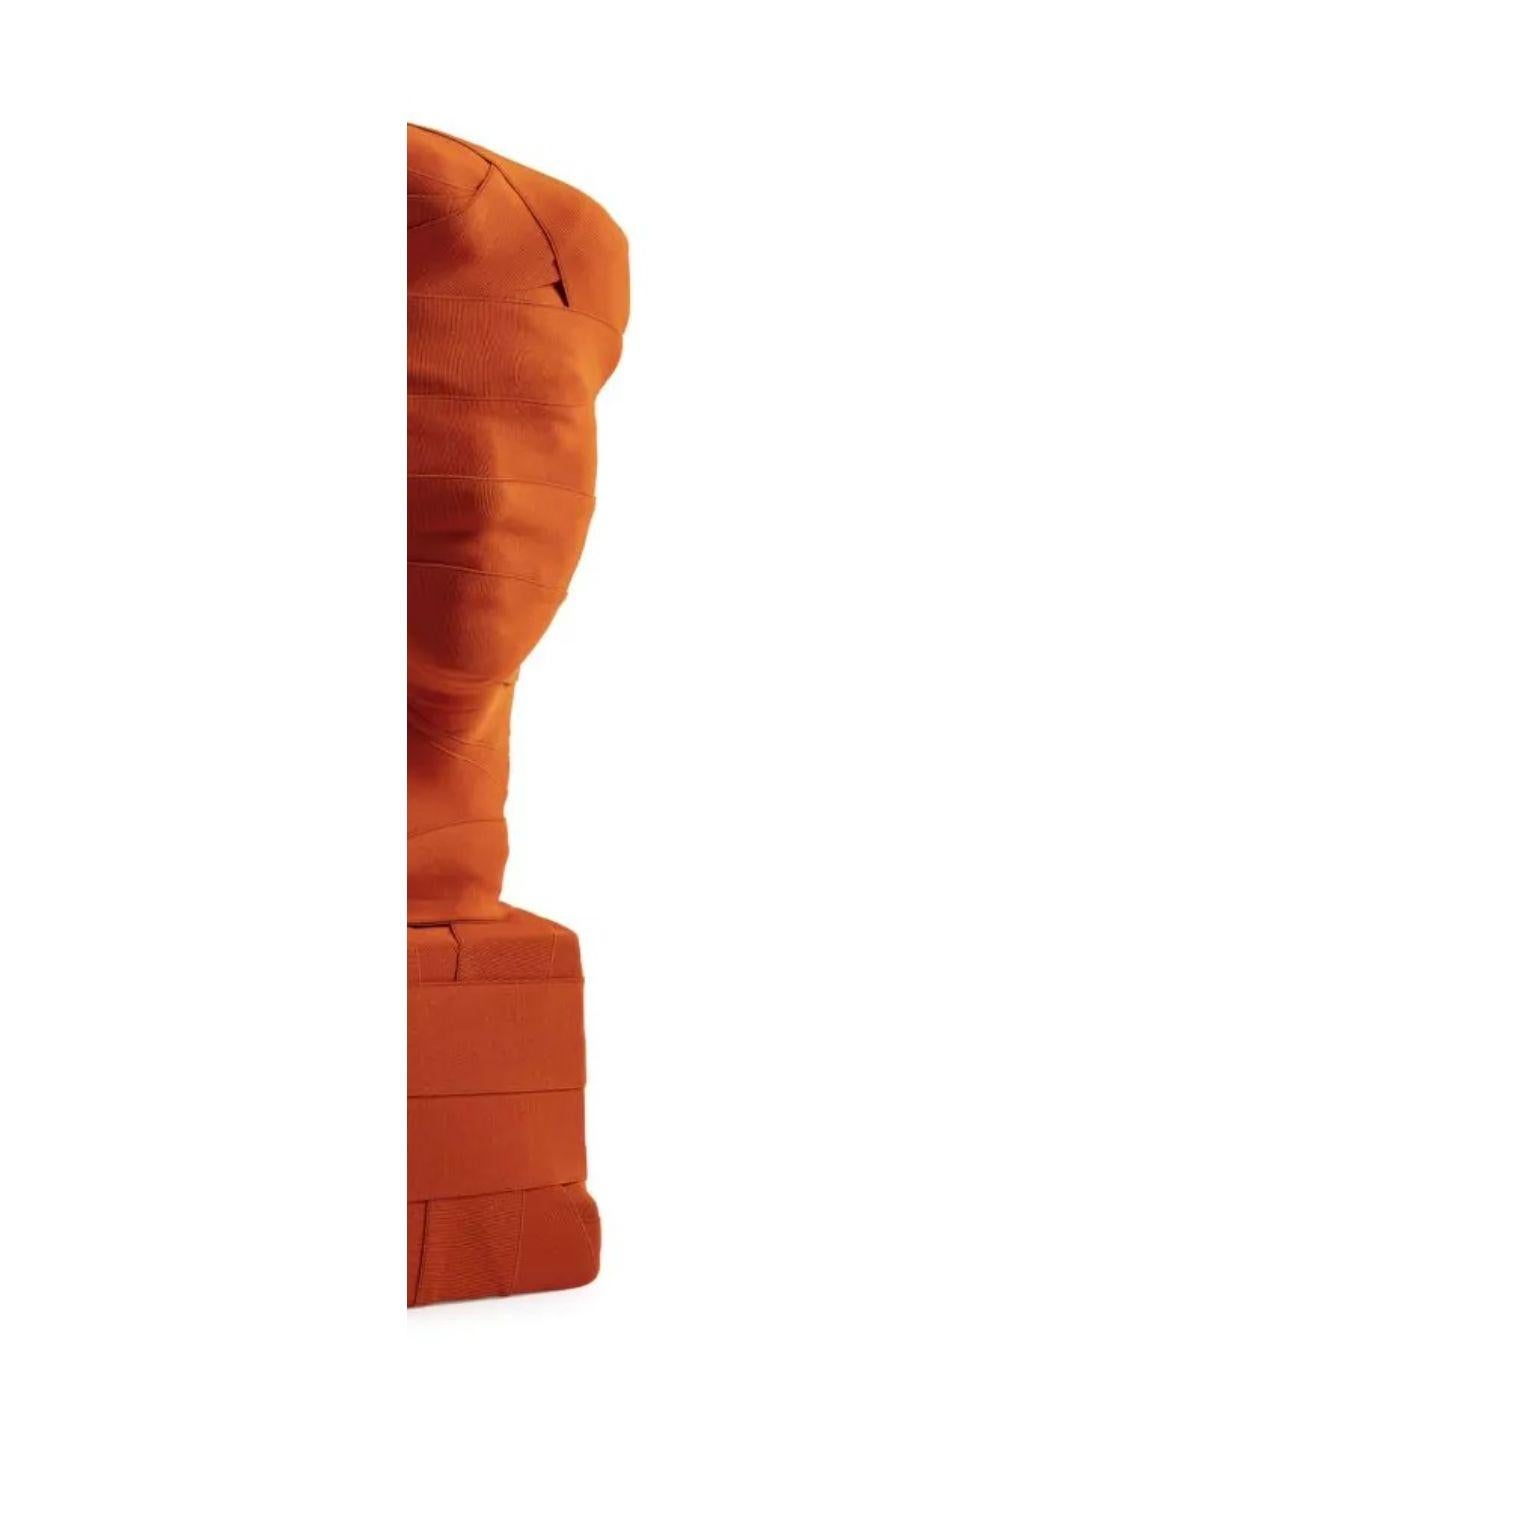 Modern This Is Not Self Portrait Sculpture by Thomas Dariel For Sale